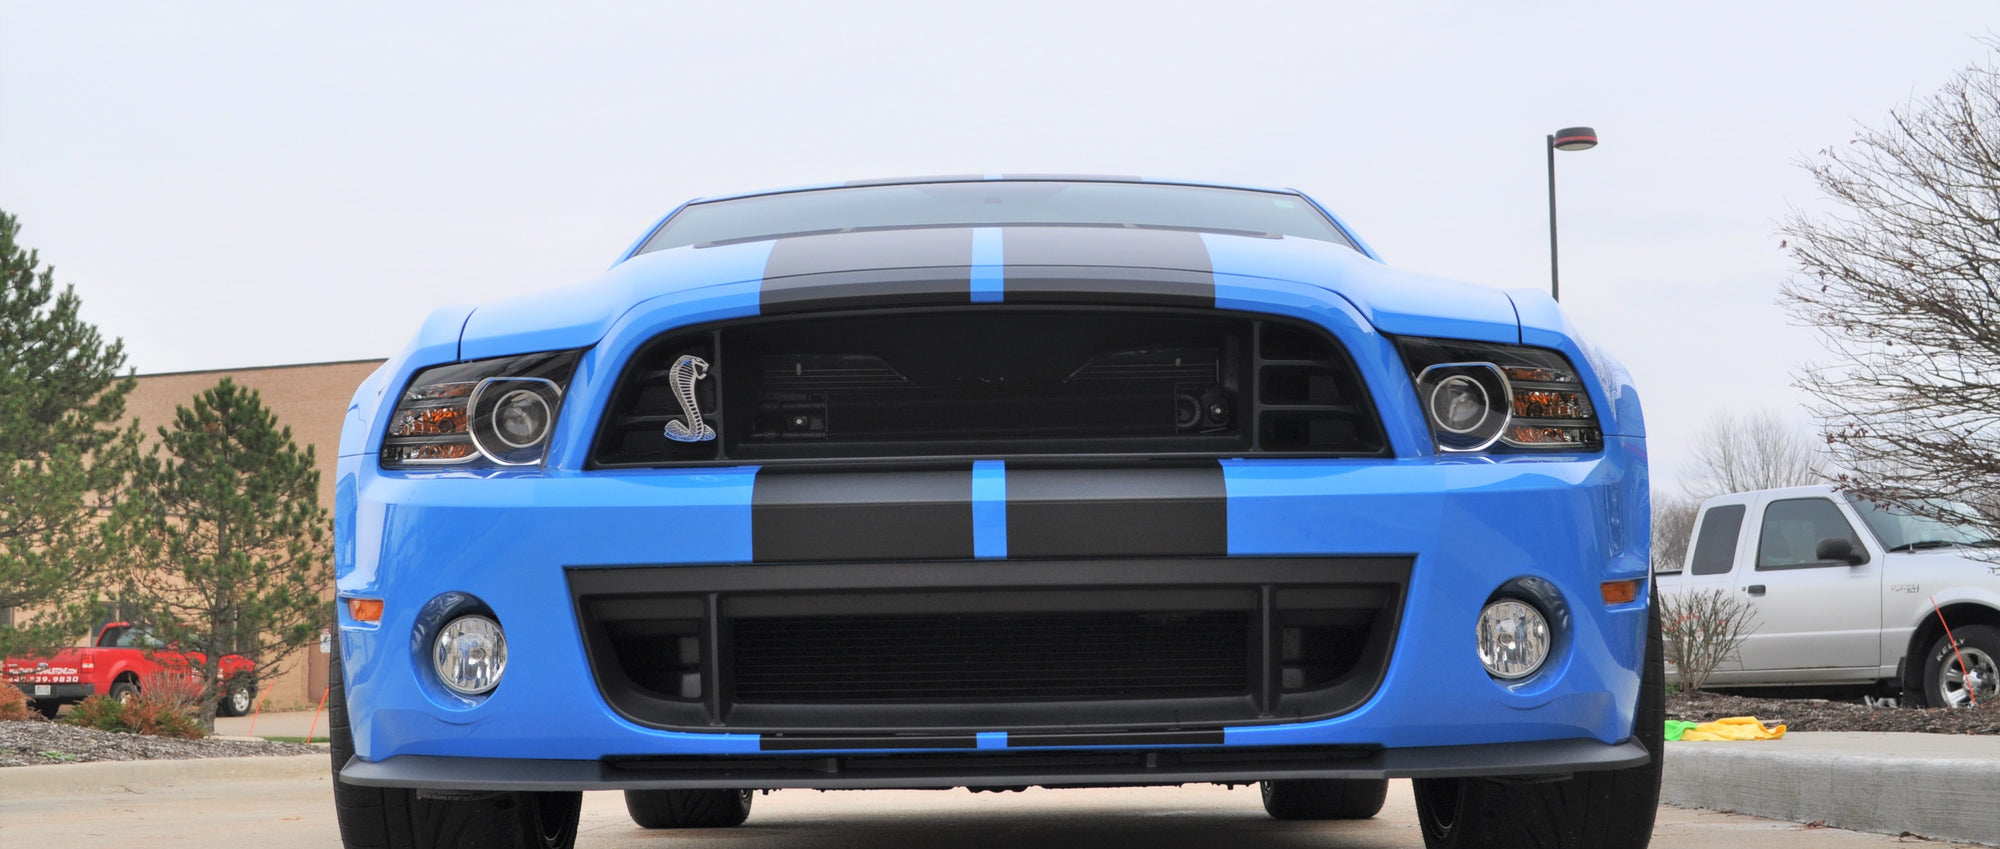 2012 Ford Mustang Shelby GT500 5.4L V8